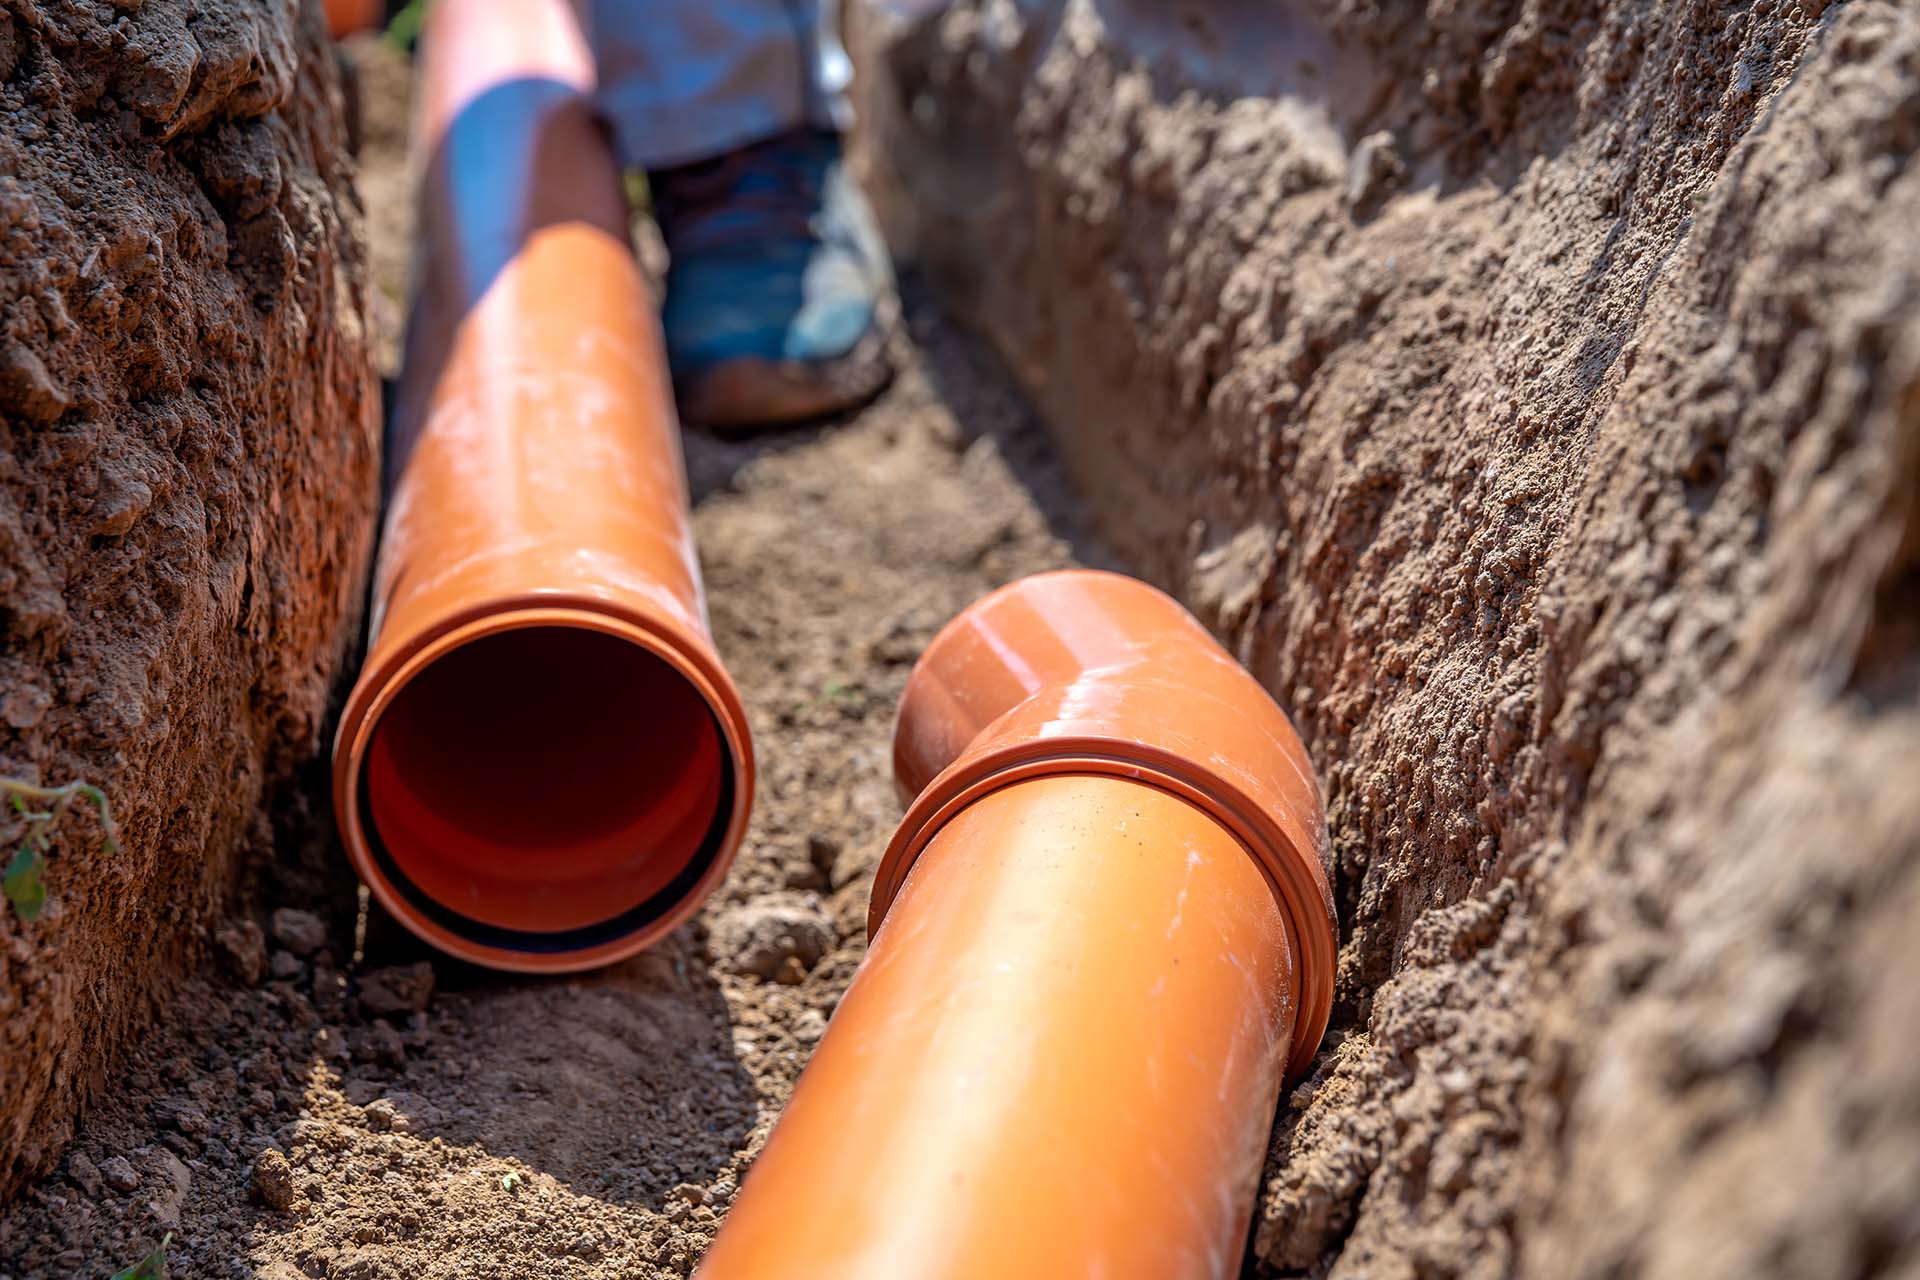 sewer pipes being installed in the ground